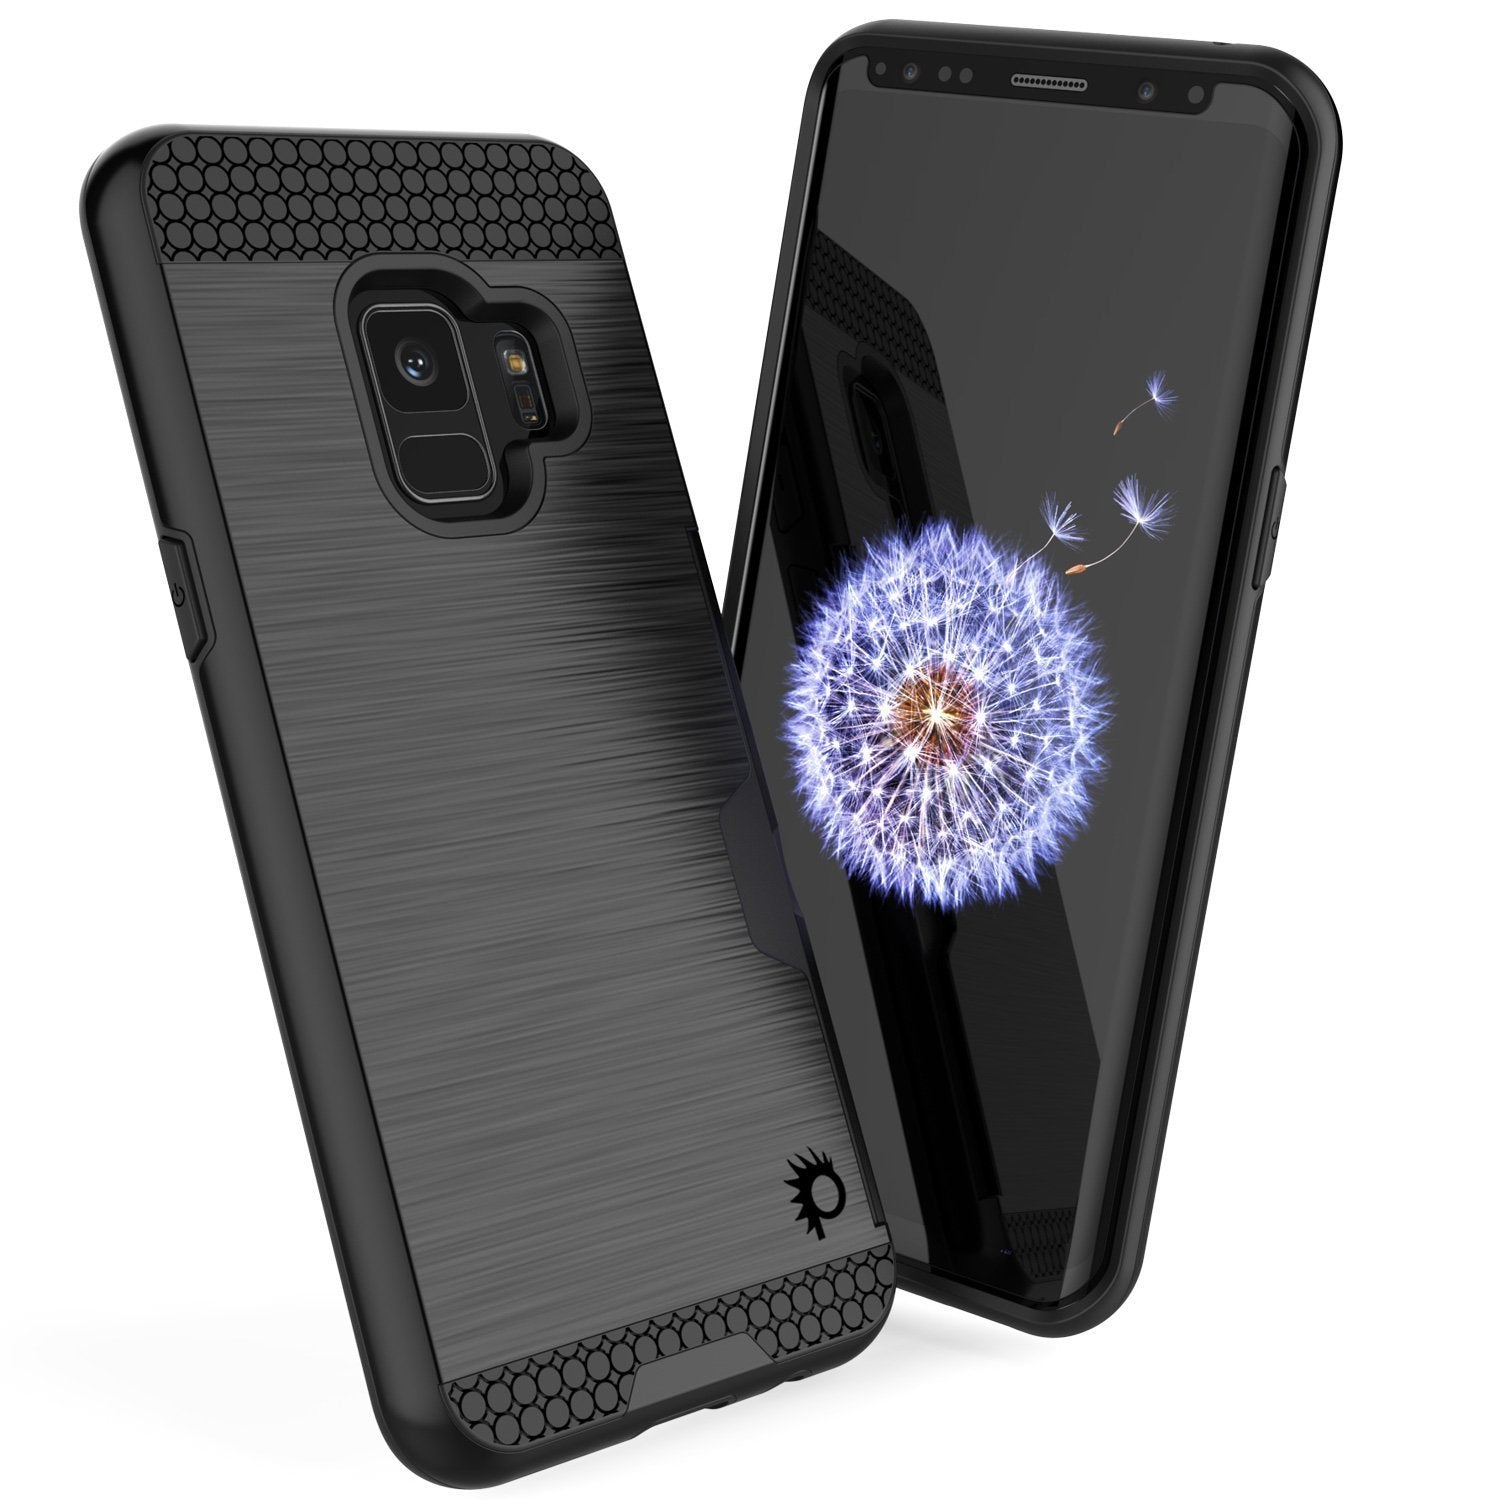 Galaxy S9 Case, PUNKcase [SLOT Series] [Slim Fit] Dual-Layer Armor Cover w/Integrated Anti-Shock System, Credit Card Slot [Black]